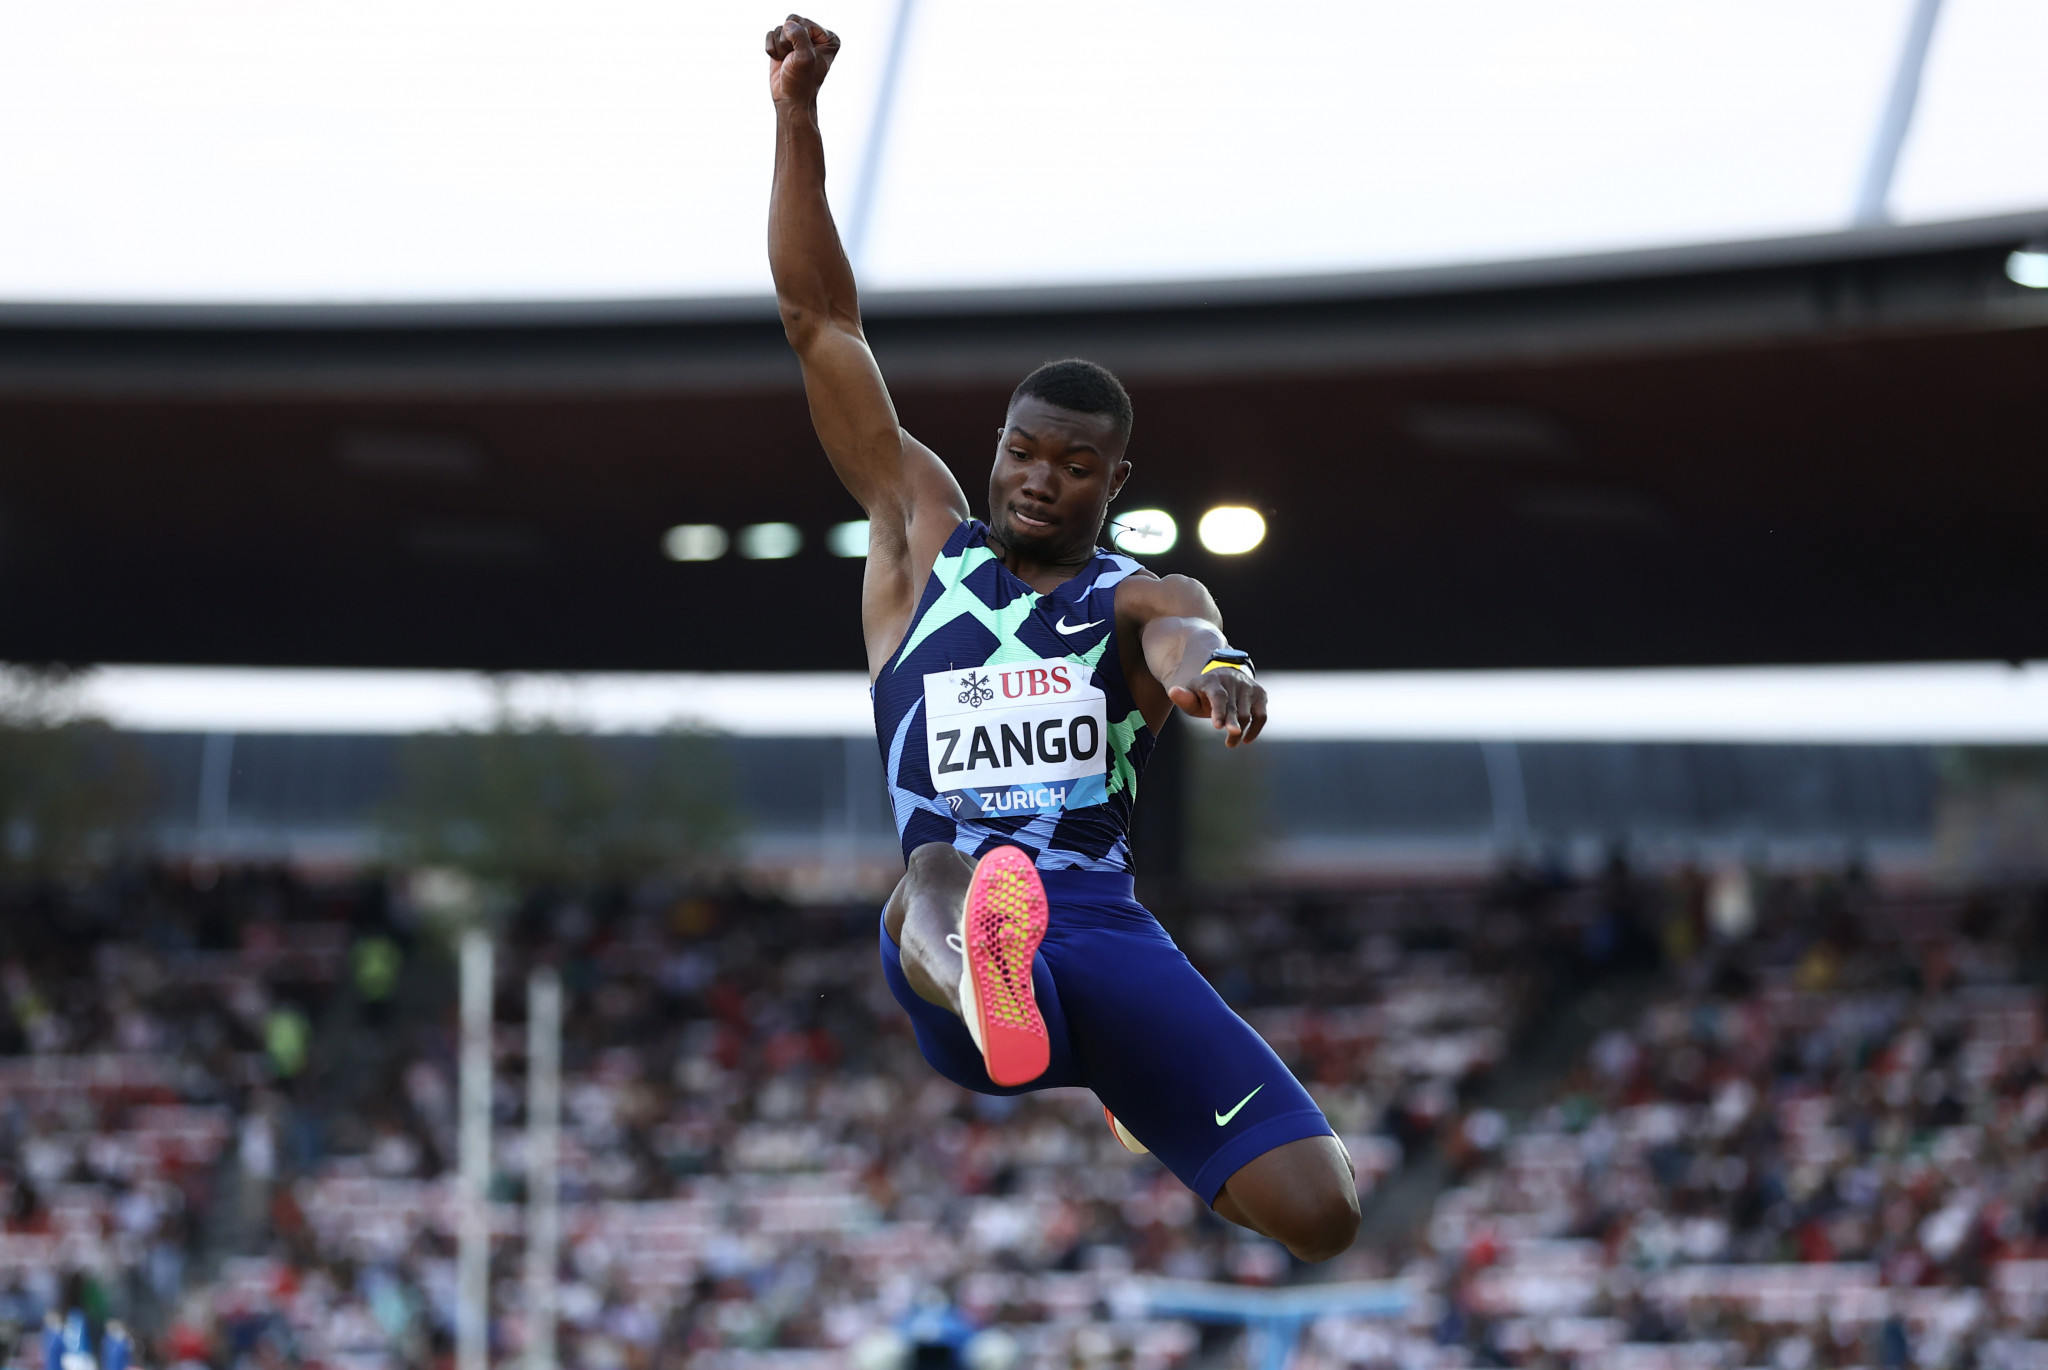 Hugues Fabrice Zango claimed the men's triple jump title today at the African Athletics Championships ©Getty Images